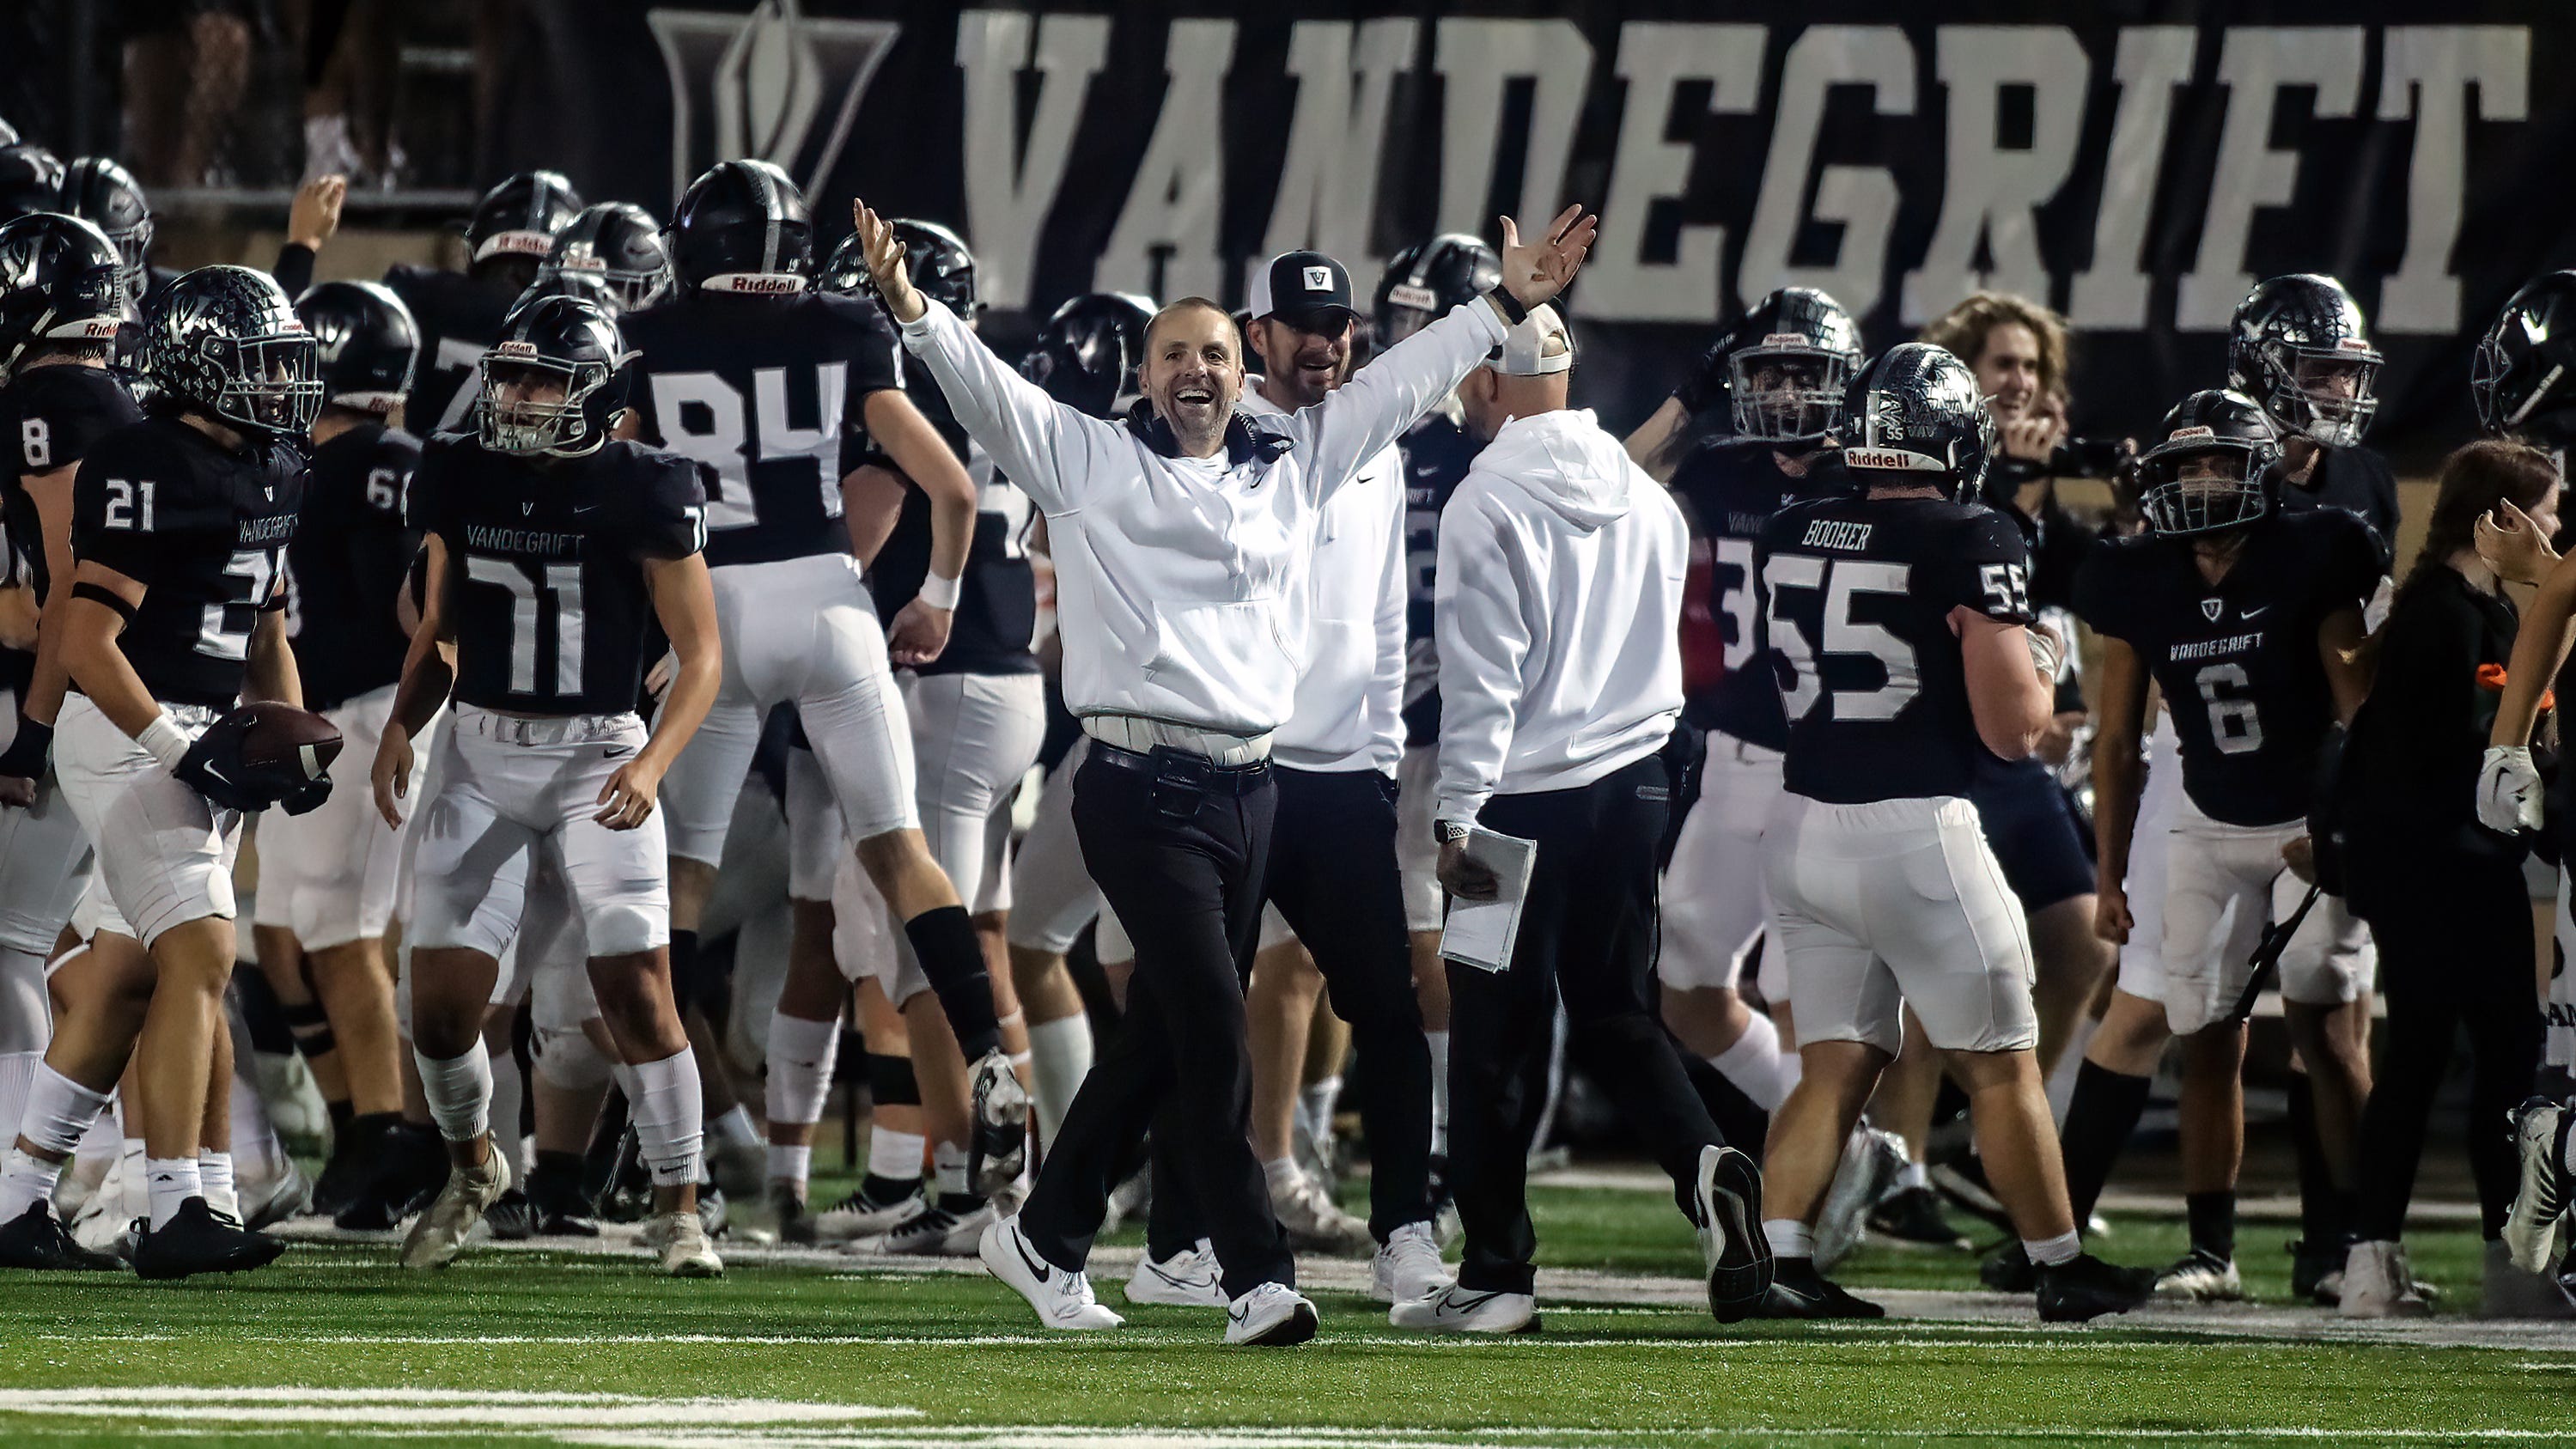 Vandegrift uses late goalline stand to beat Dripping Springs